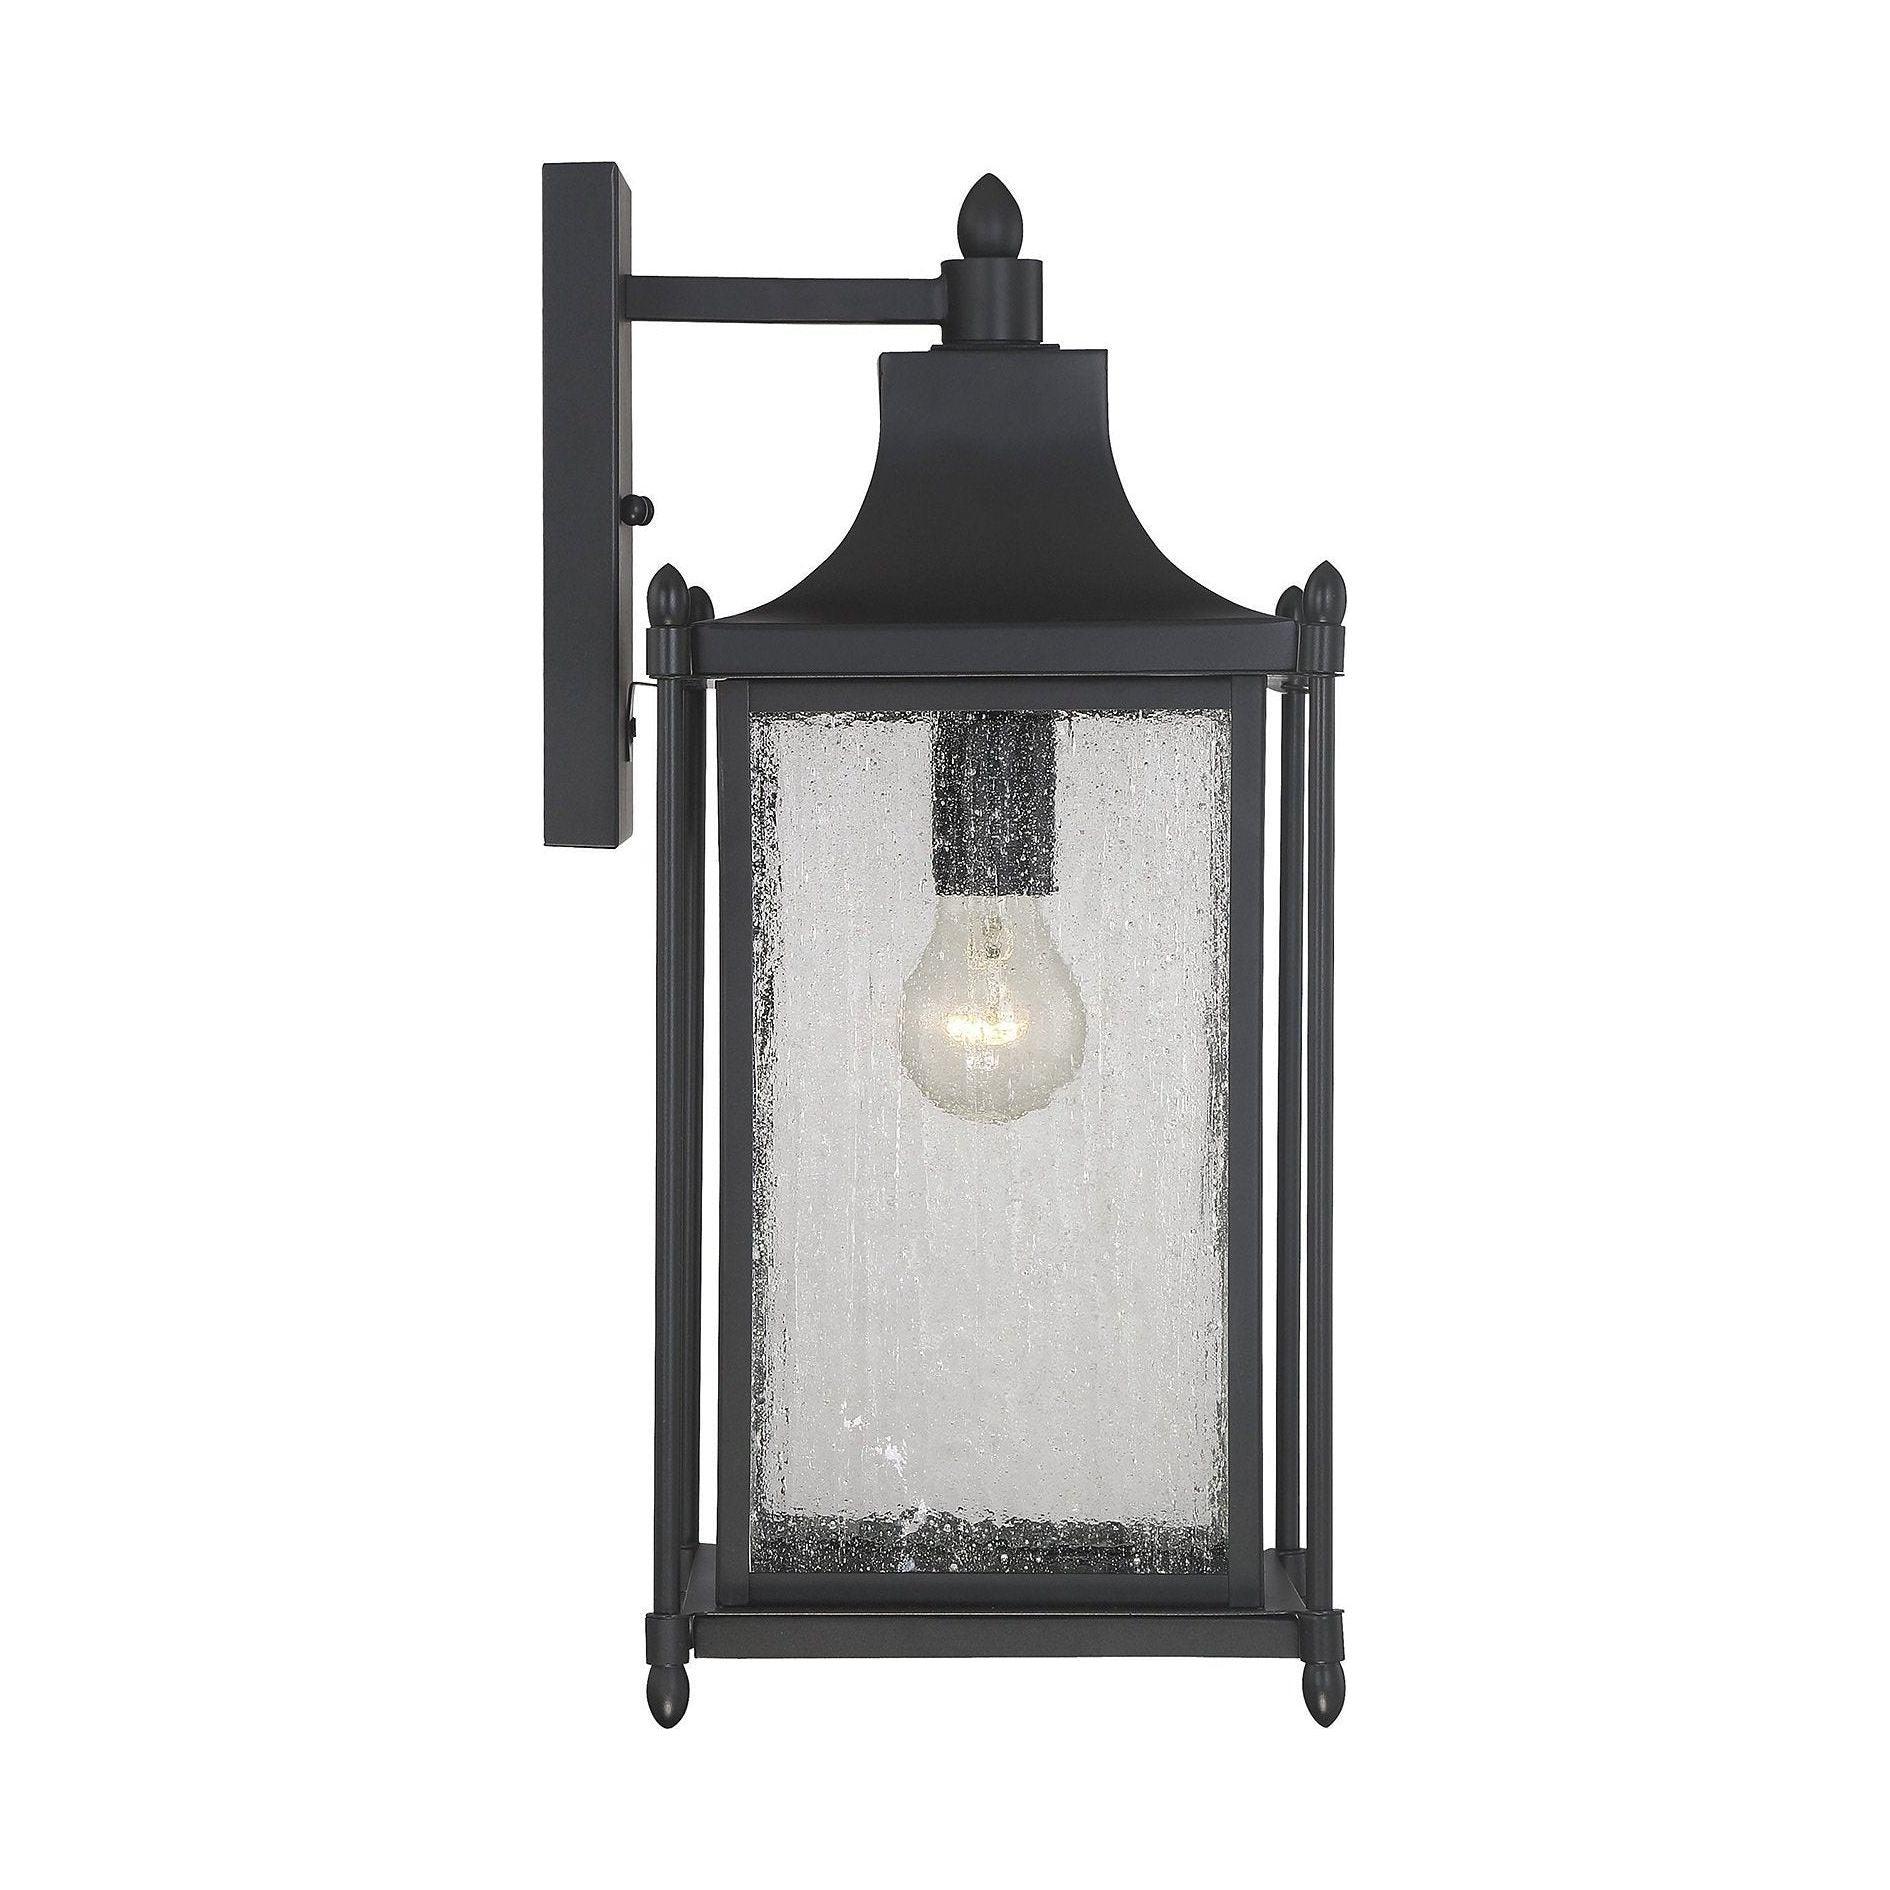 Savoy House - Dunnmore Outdoor Wall Light - Lights Canada